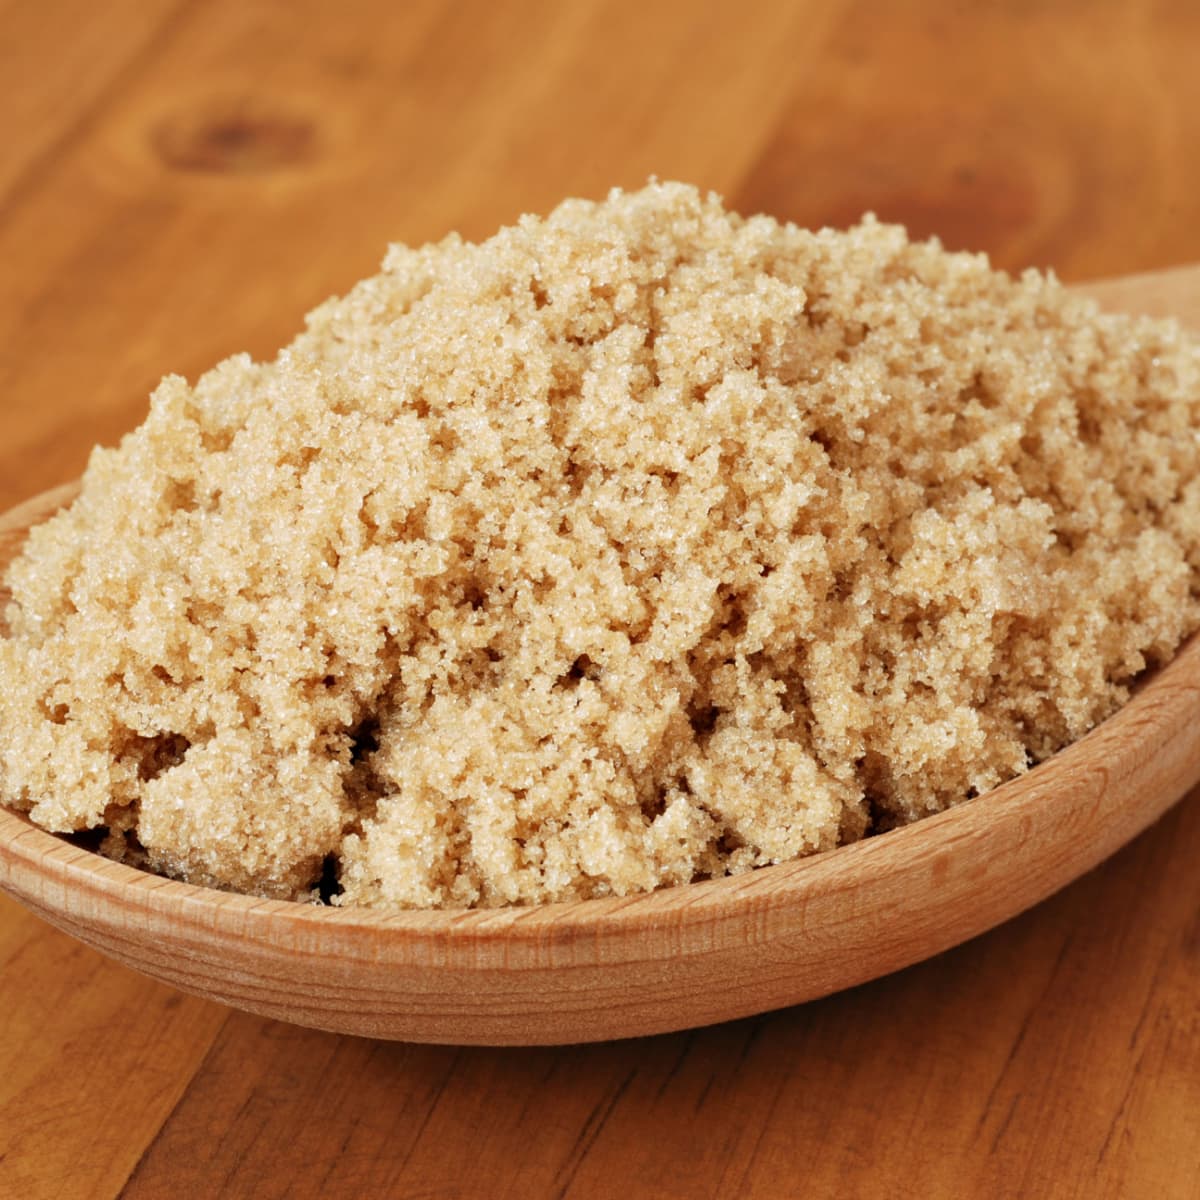 Light Brown Sugar in a Wooden Bowl